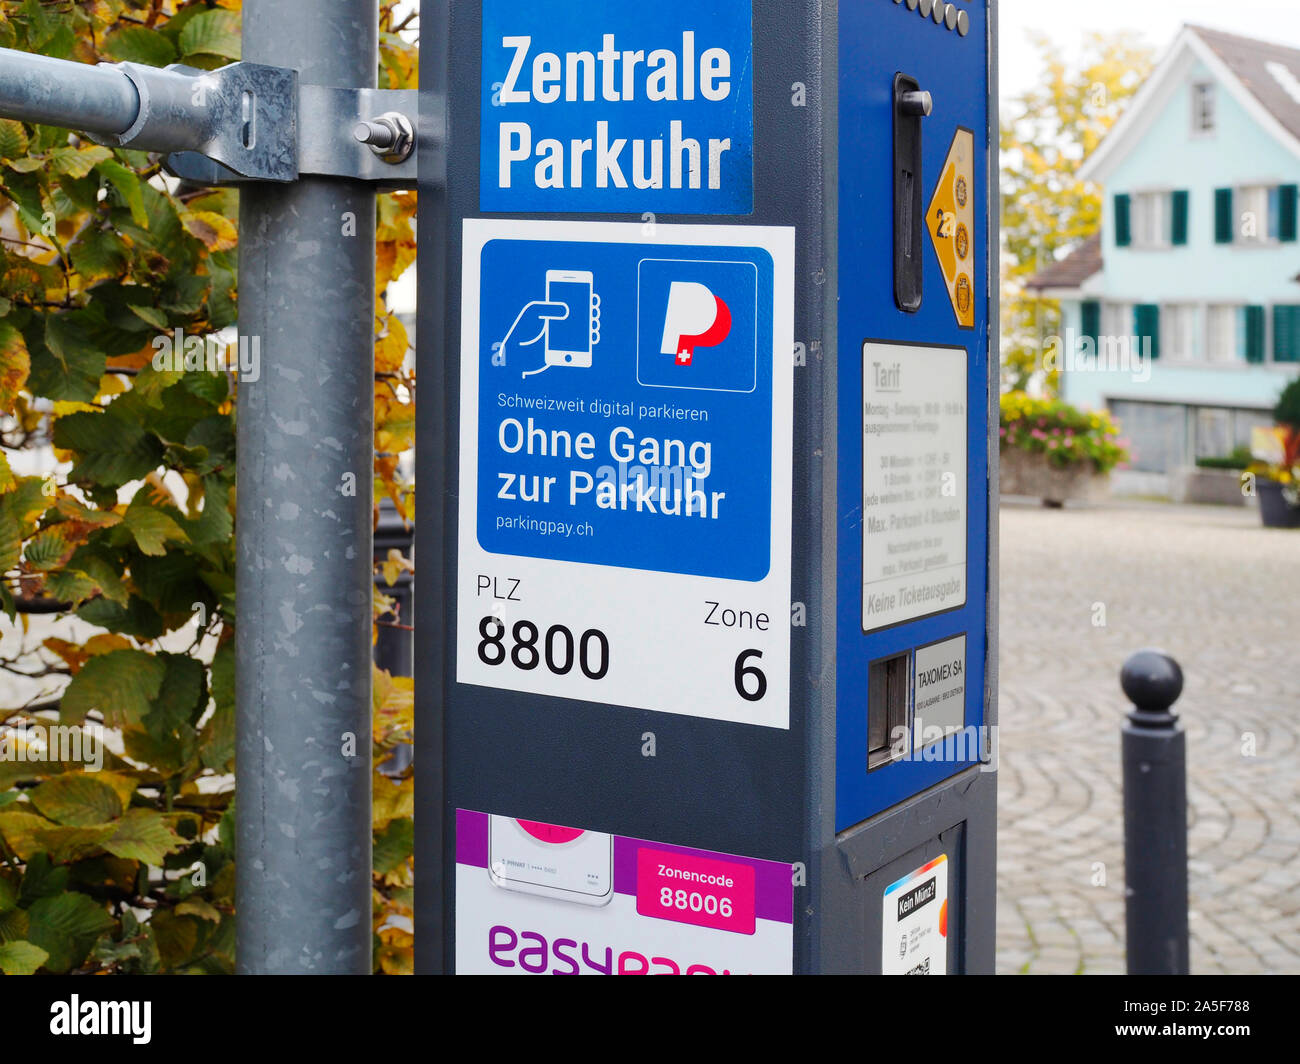 Zentrale Parkuhr in Thalwil mit parkingpay-Hinweis Stock Photo